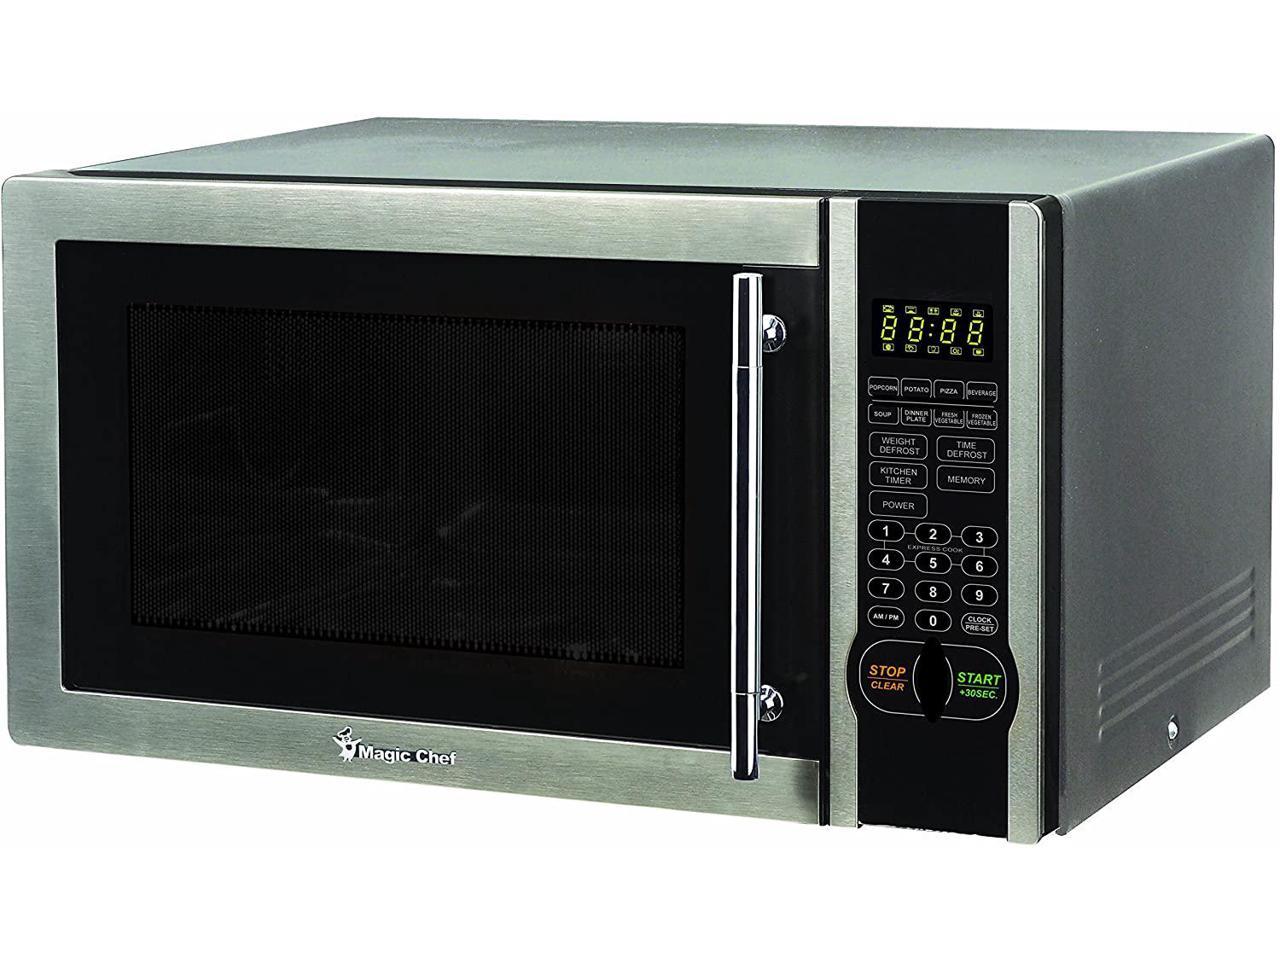 Magic Chef MCM1110ST 1000W 1.1 Cubic Foot Countertop Microwave Oven